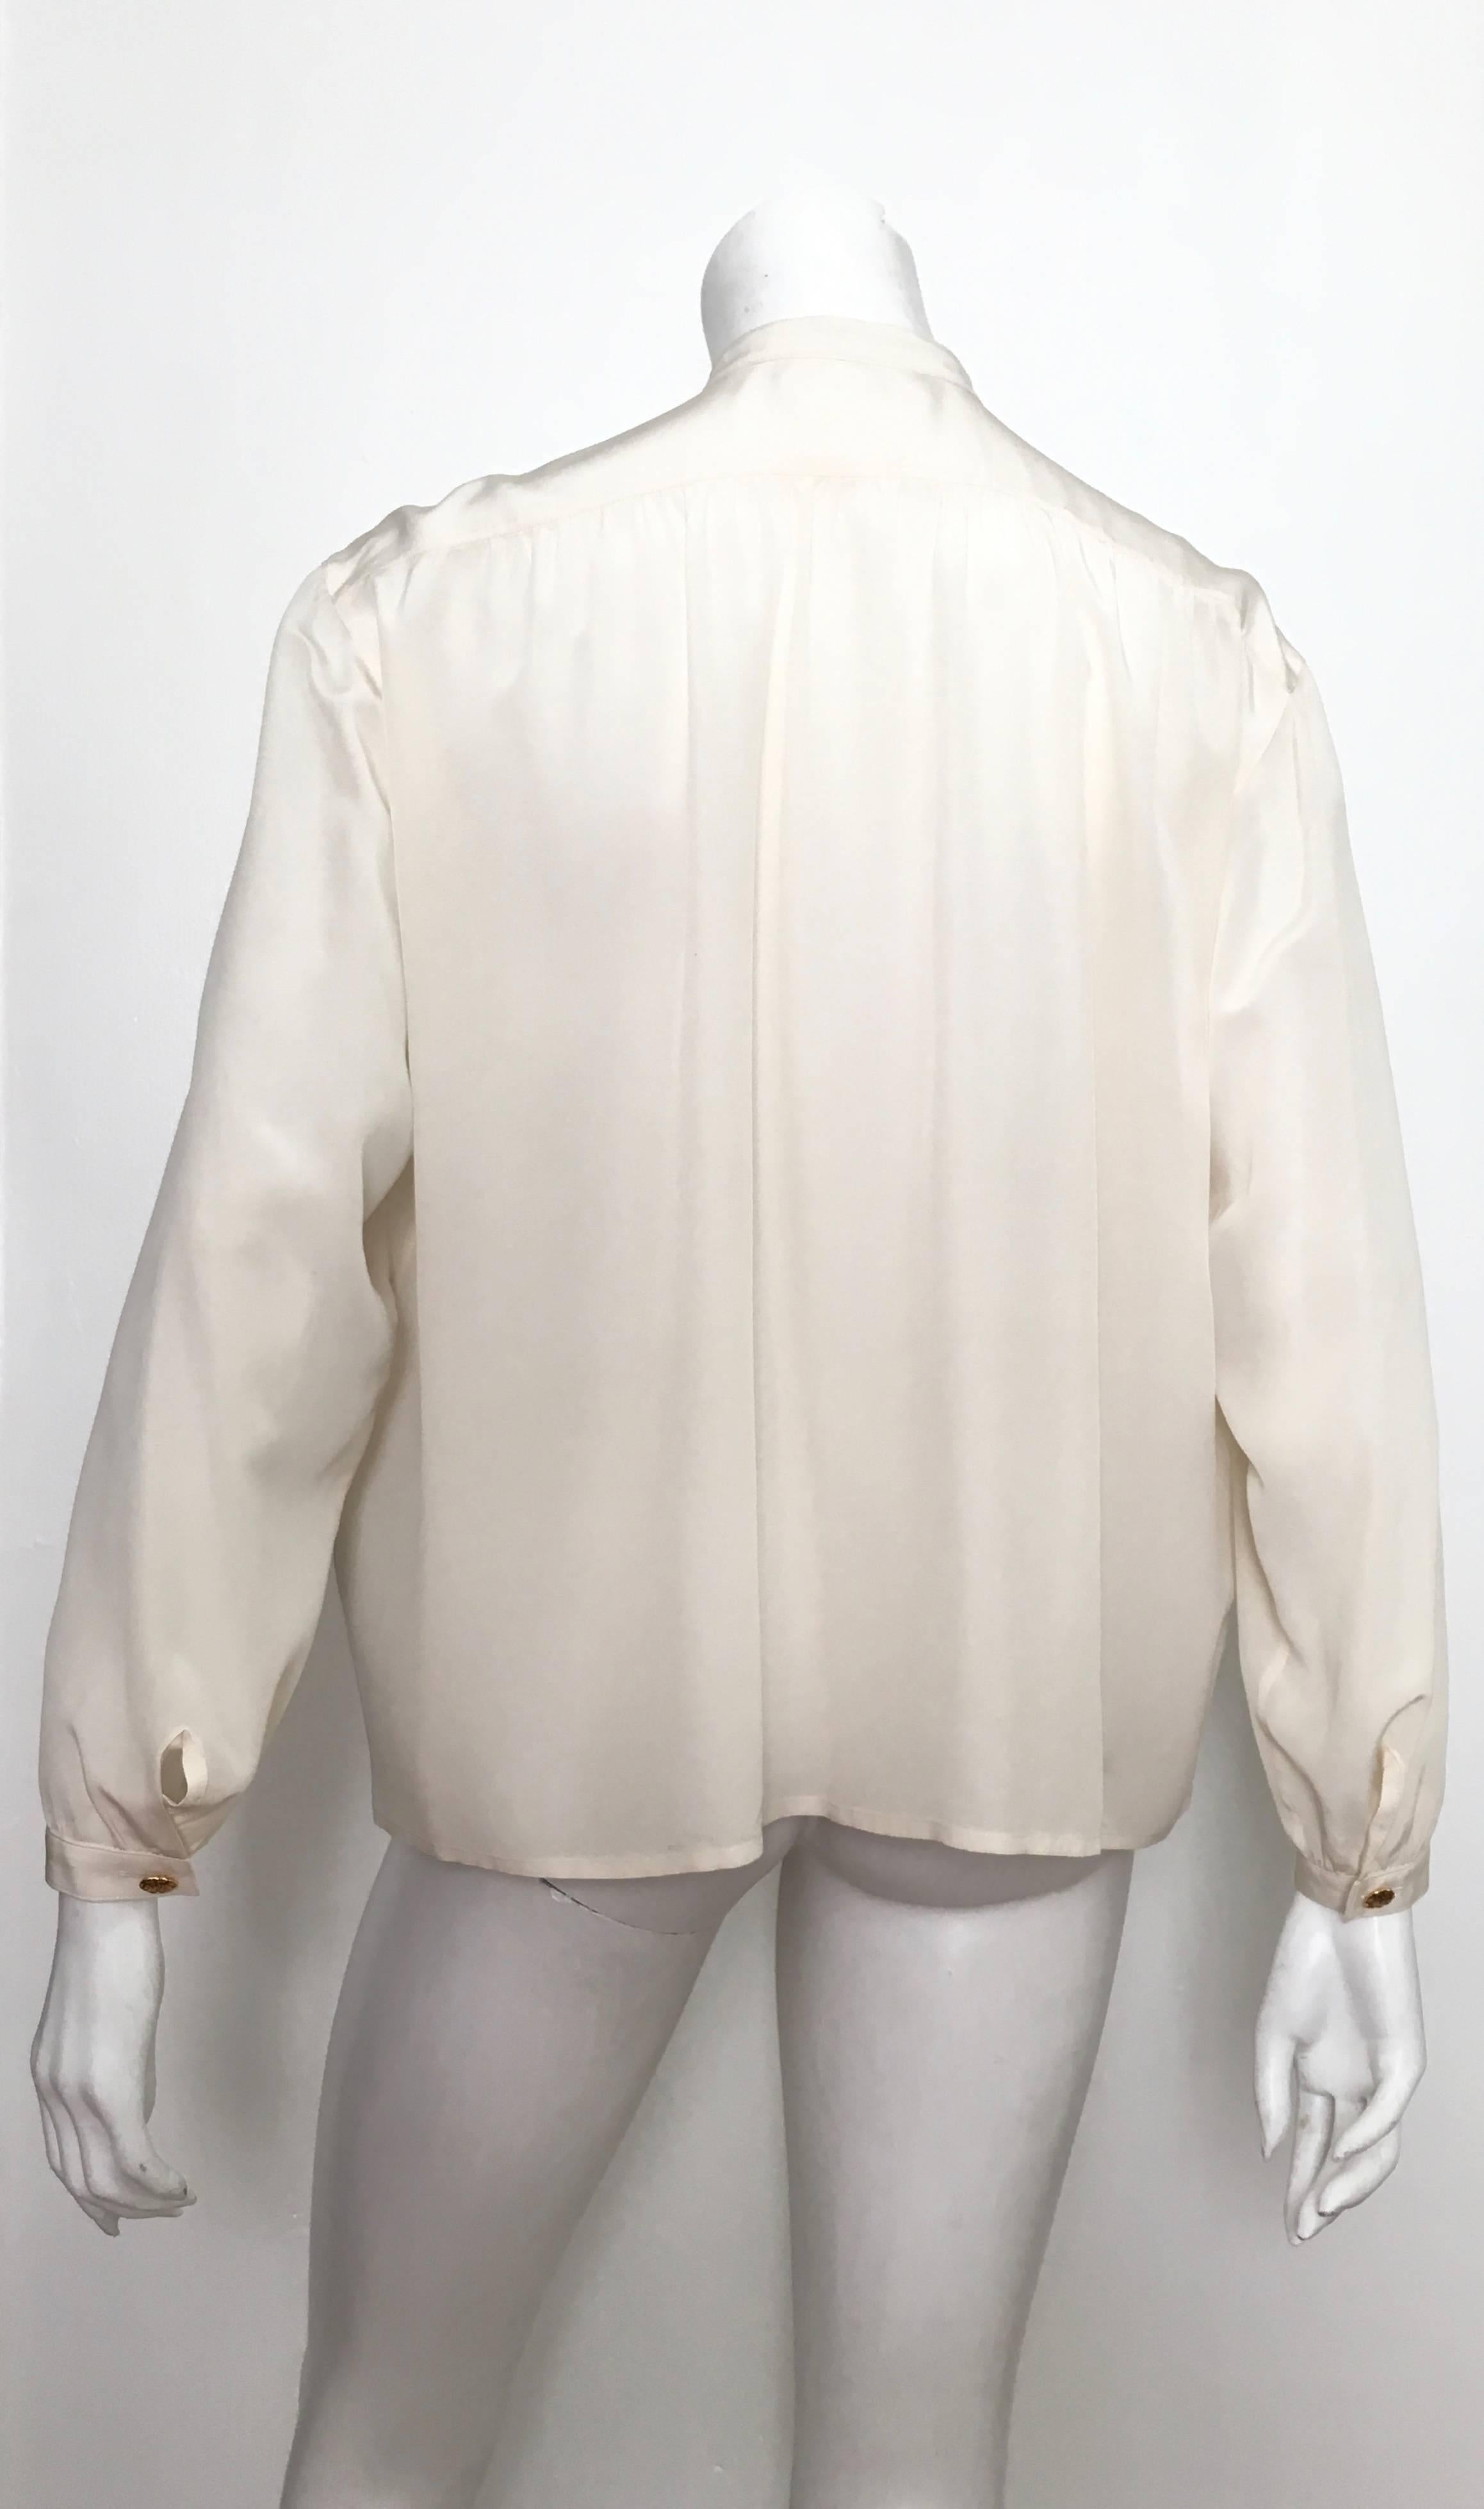 Yves Saint Laurent Silk Blouse Size 6, 1990s  In Excellent Condition For Sale In Atlanta, GA